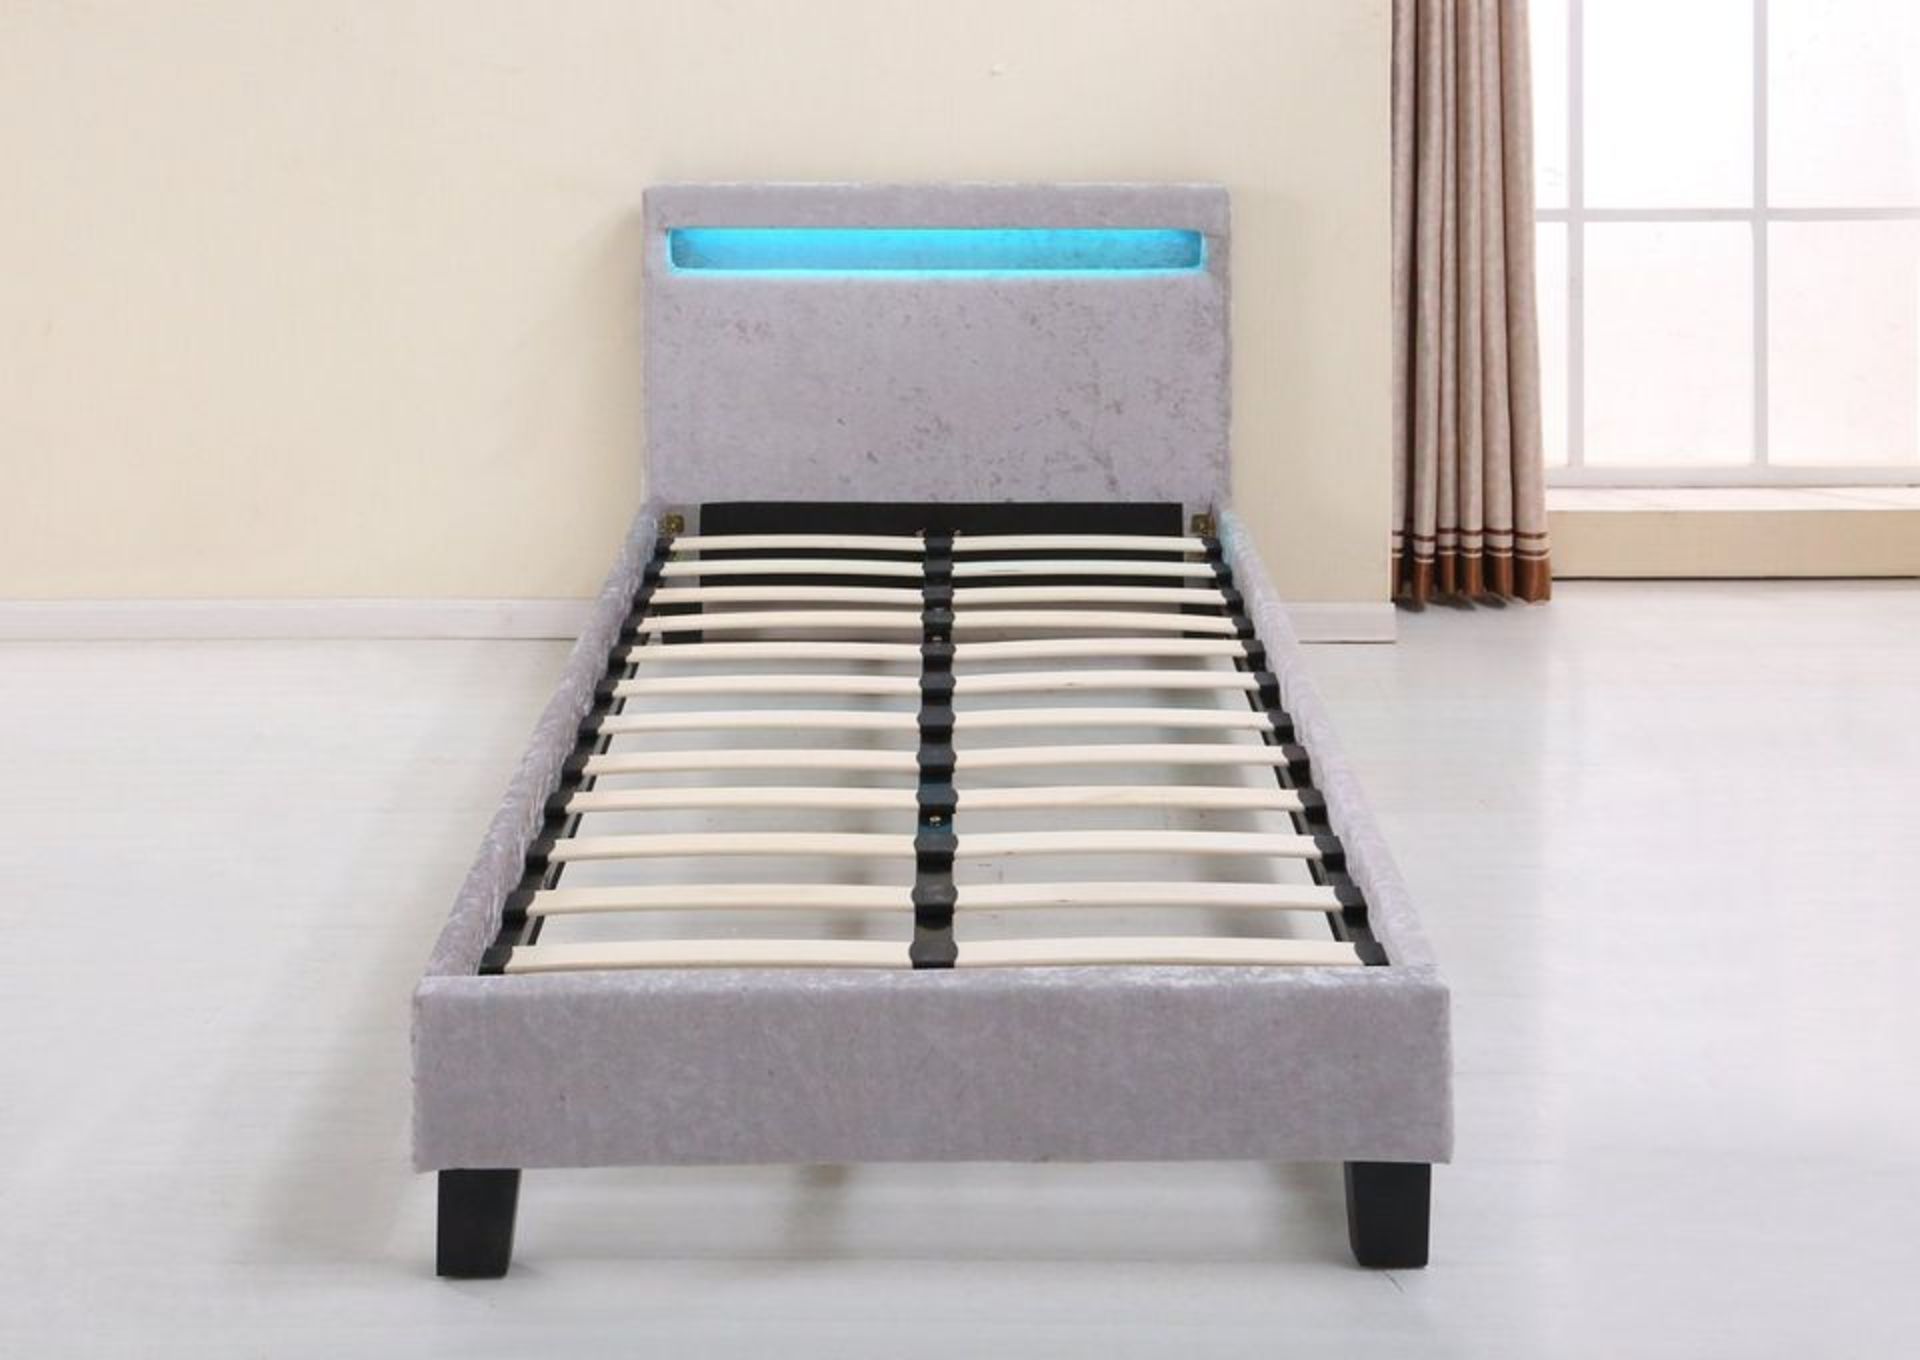 COOL SINGLE LED COLOUR CHANGING BED WITH REMOTE BRAND NEW BOXED - SILVER CRUSHED VELVET - Image 2 of 4